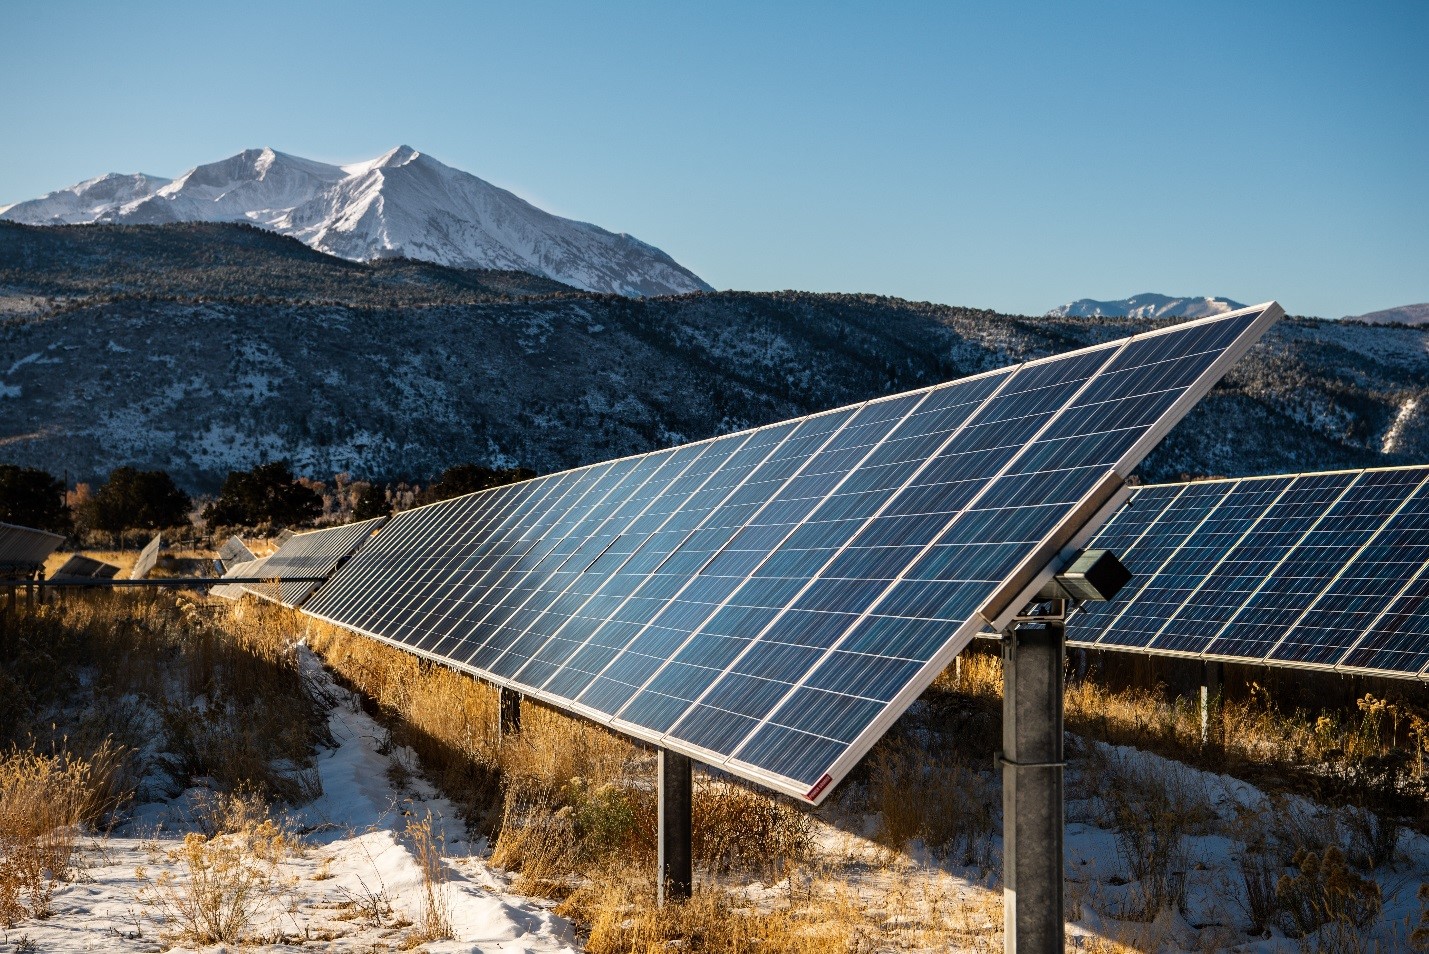 Ground mount solar array in the mountains